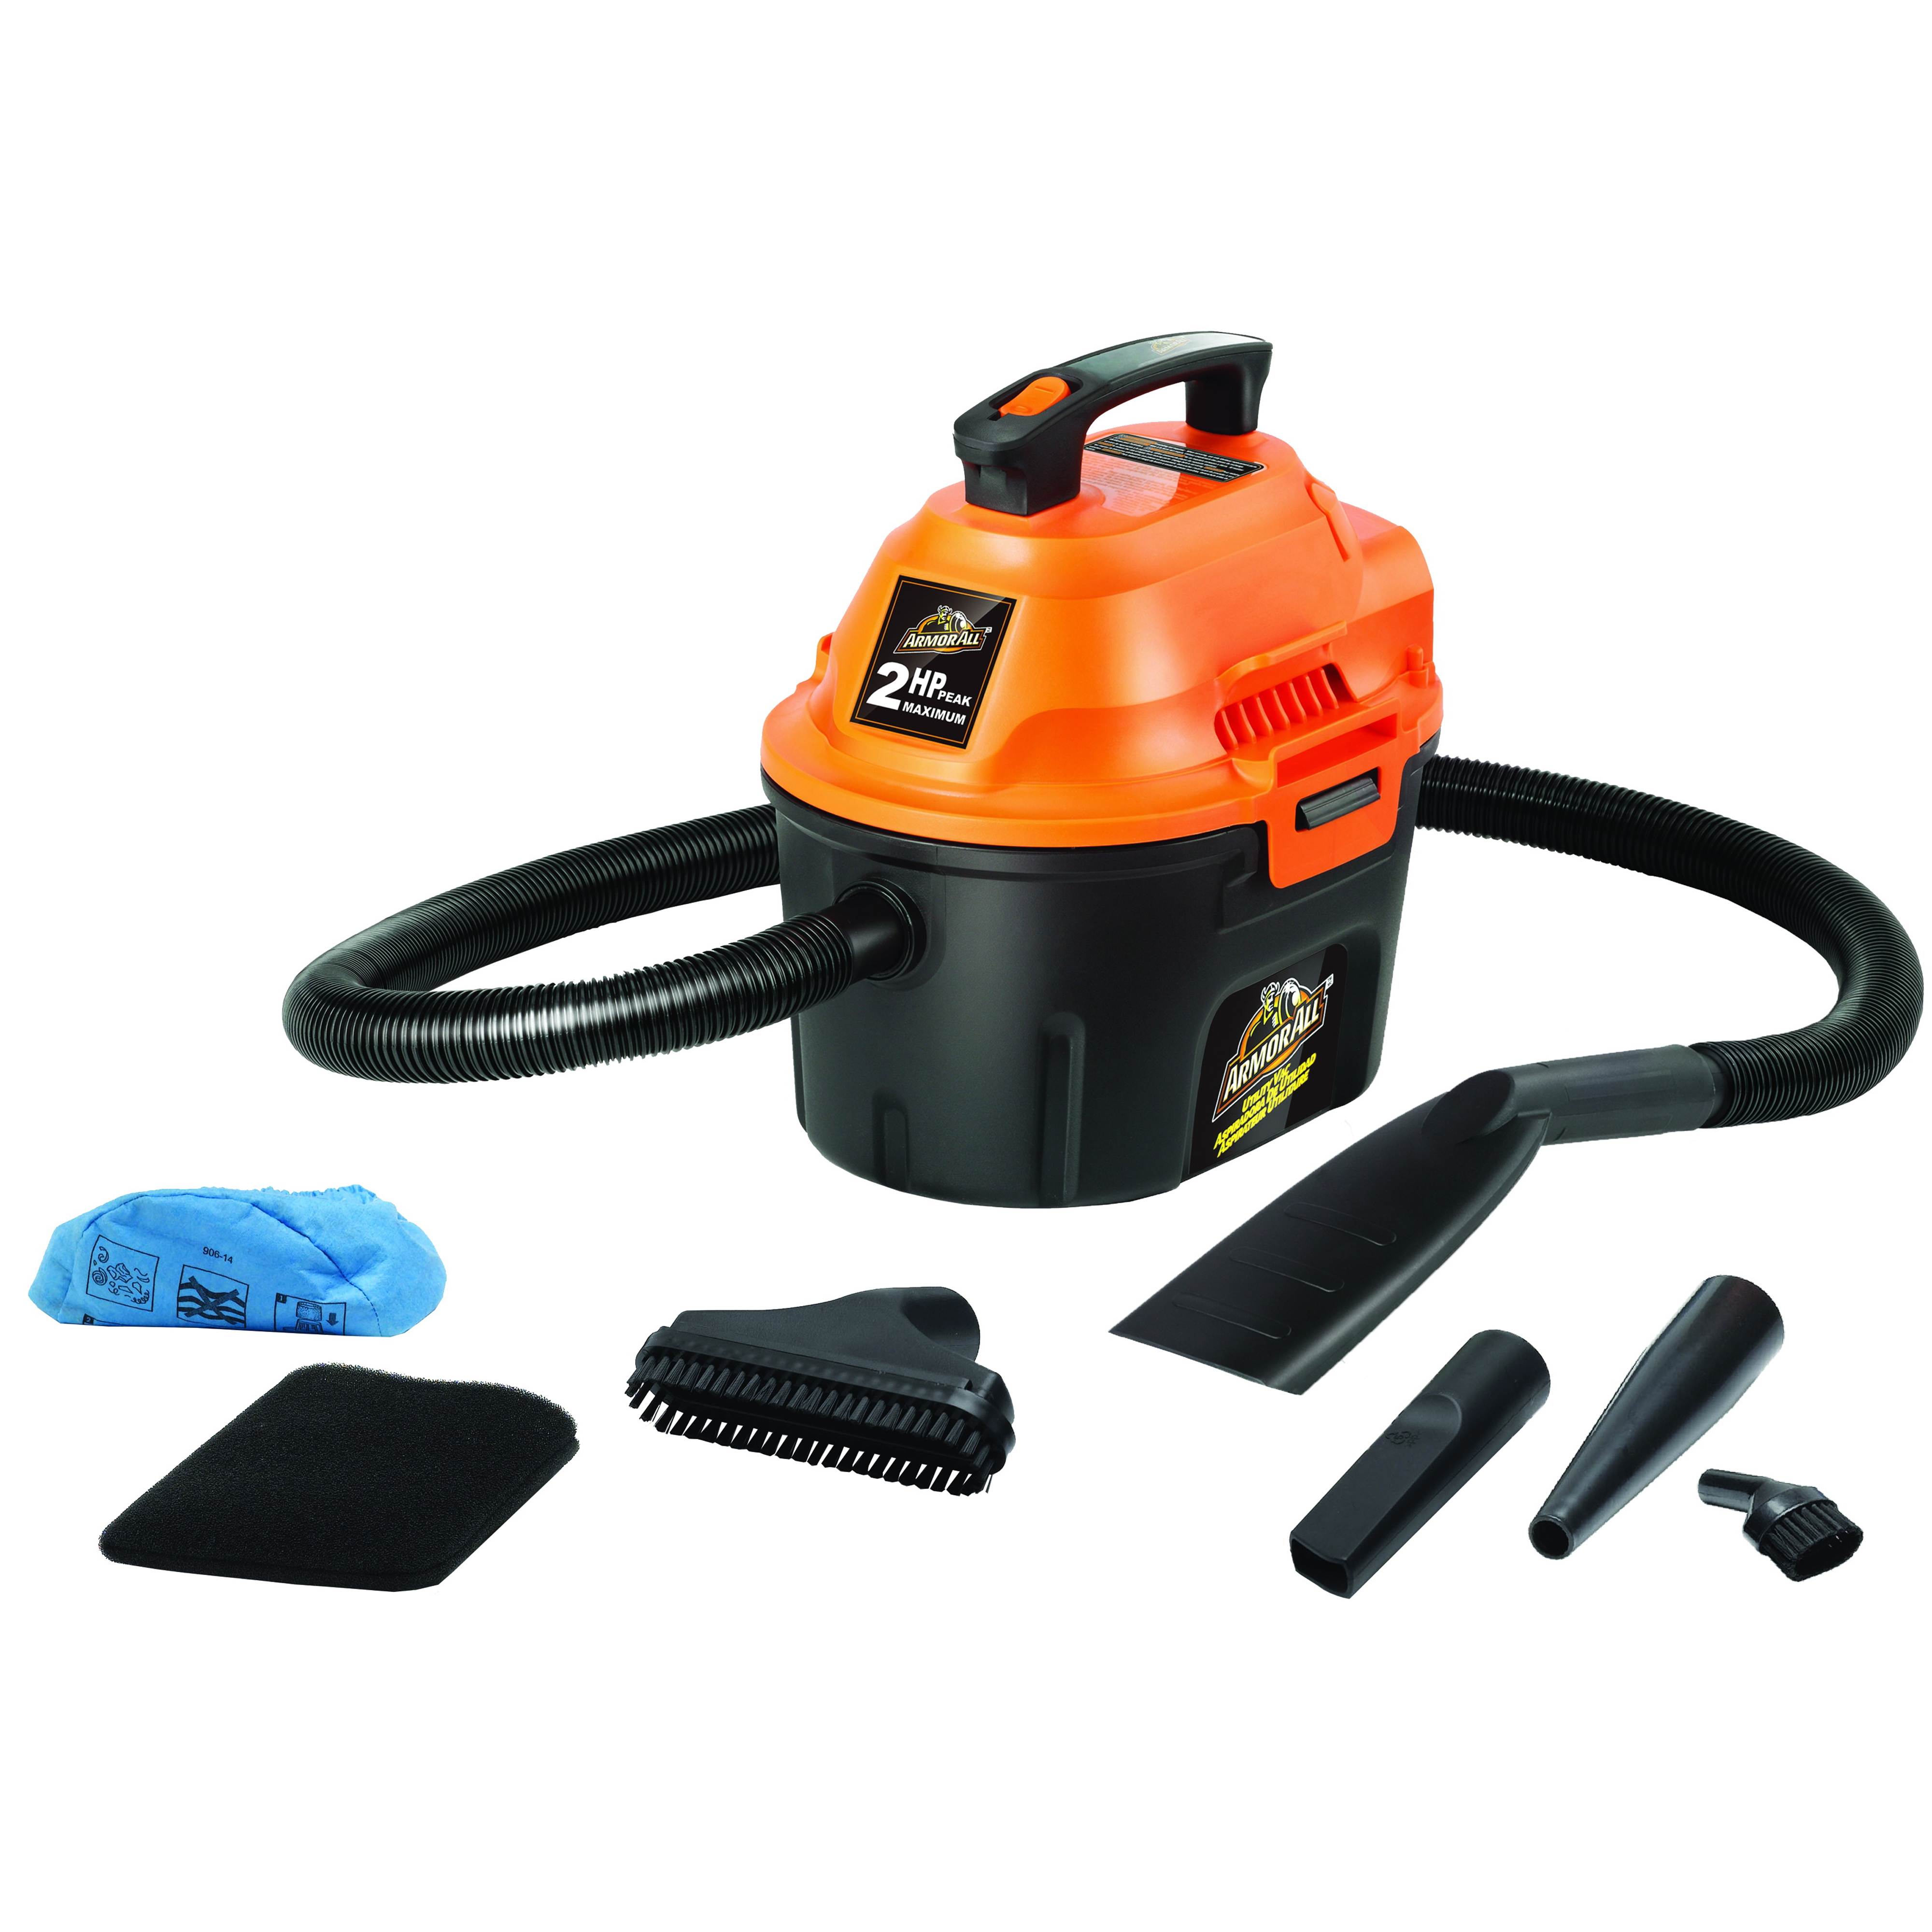 Armor All AA255 Wet and Dry Vacuum Cleaner, 2.5 gal, Quiet, Foam Sleeve - 2